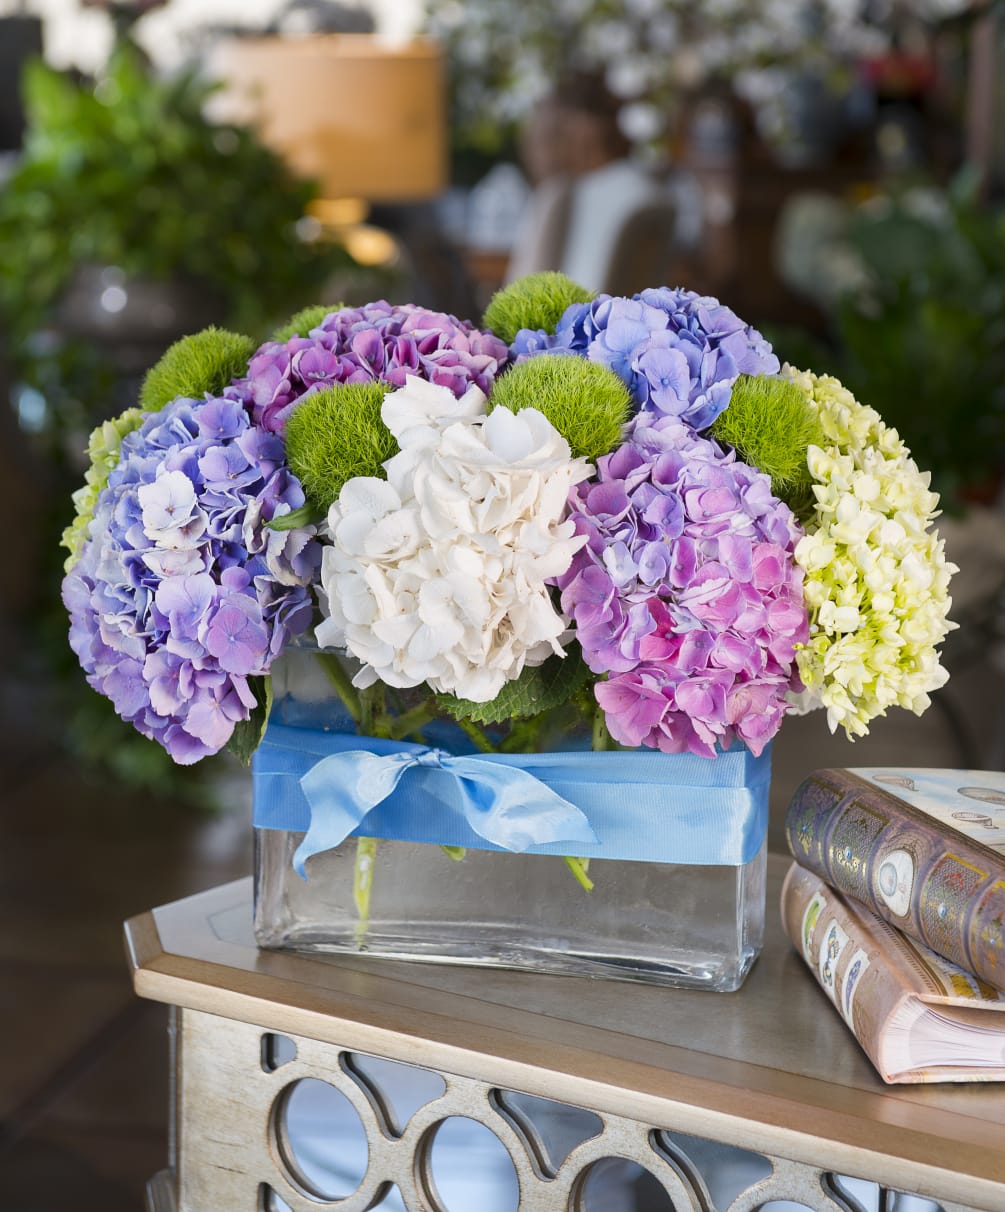 Green, blue, white and lavender hydrangea with moss balls make up this